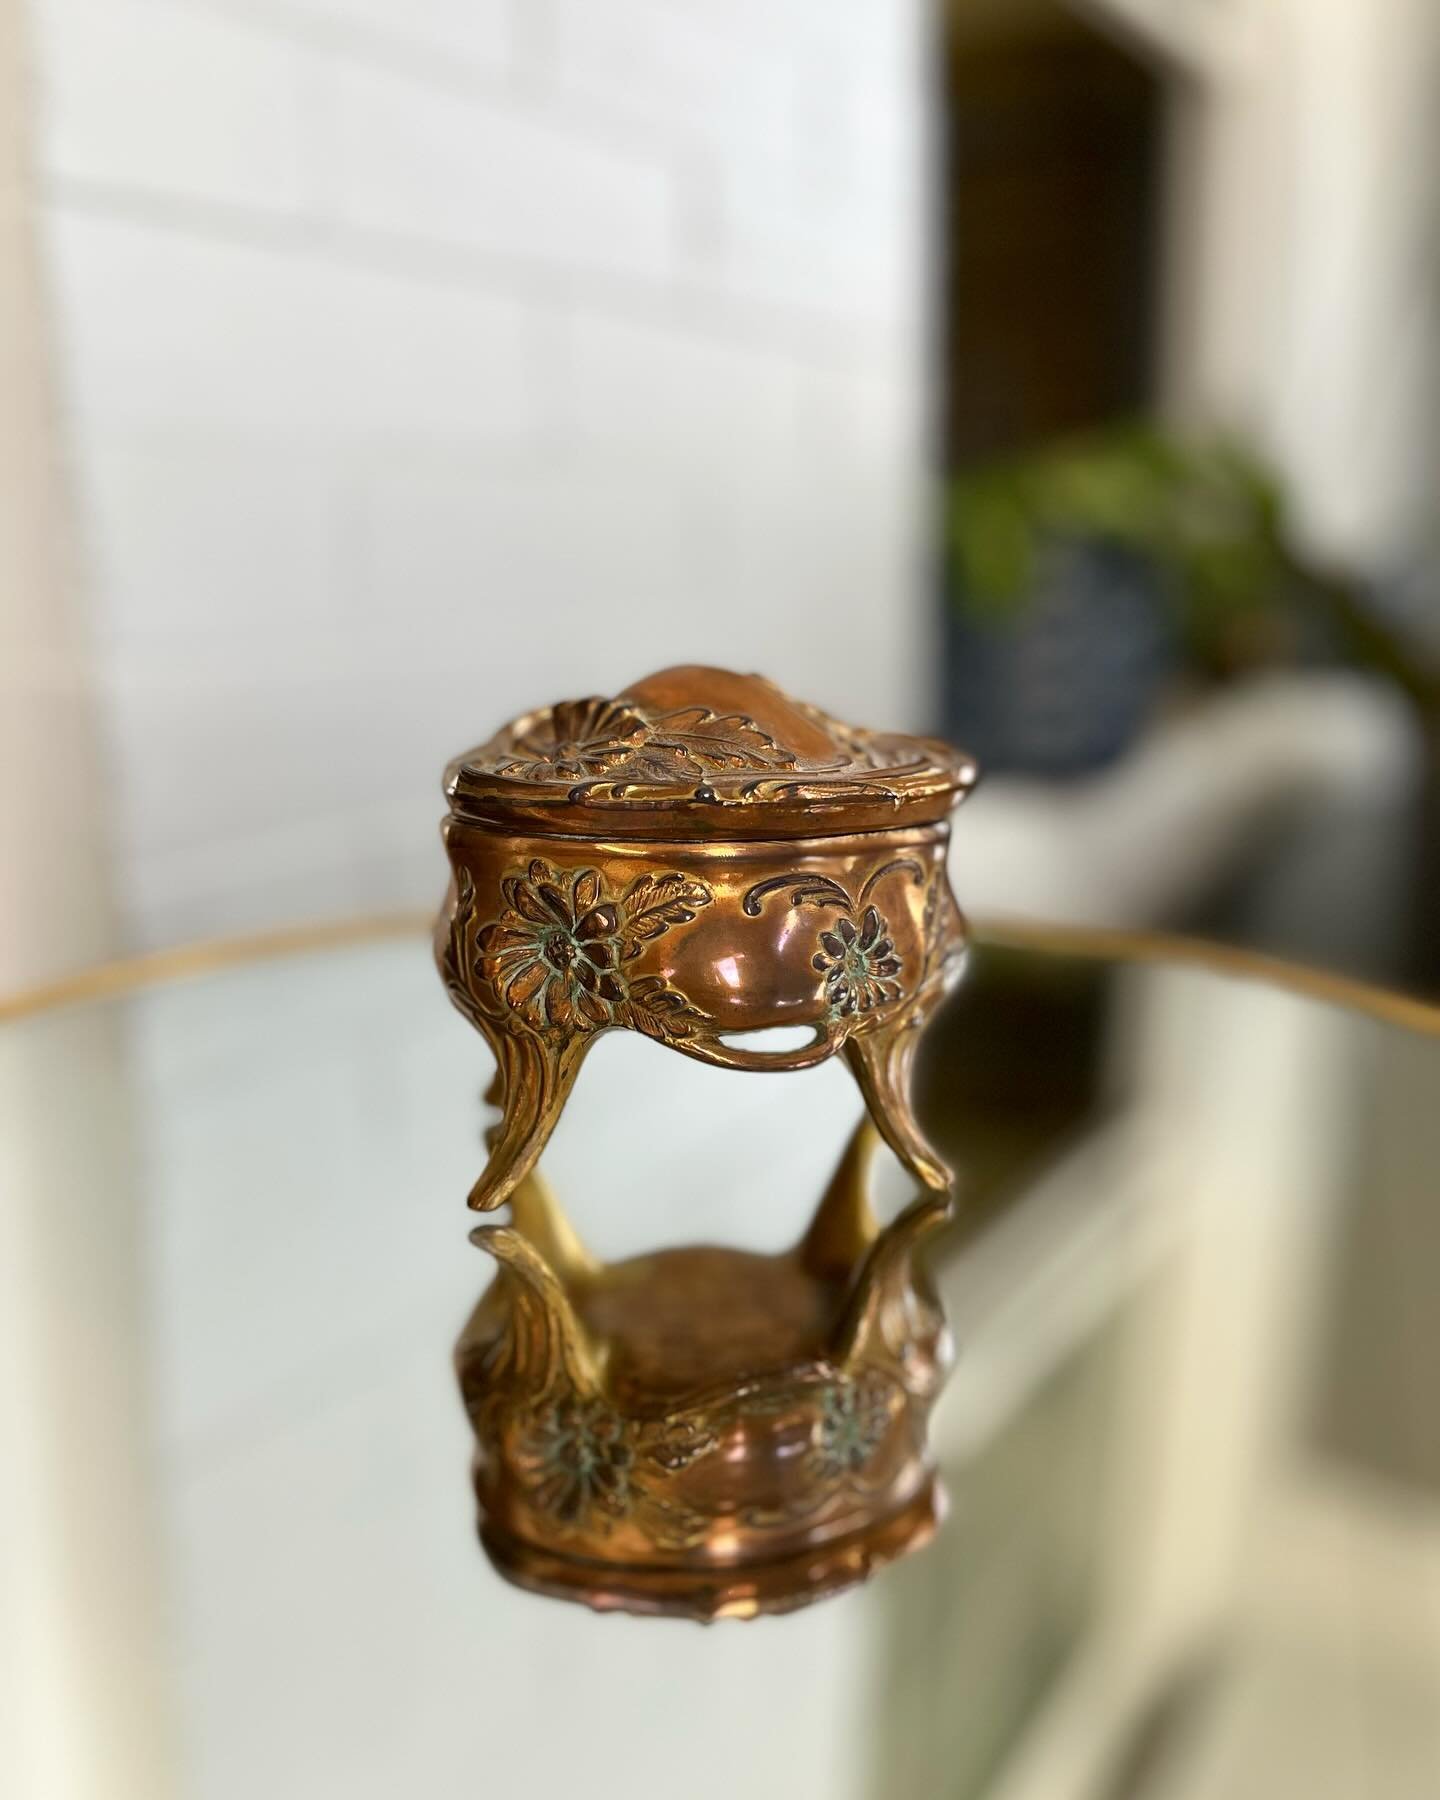 This small vintage Art Nouveau Gilt Metal Jewelry Box is a true treasure chest!

Available for $65 💎

How to shop:

- Comment SOLD on item or DM to purchase. 
- Venmo and Square are accepted
- Free local pickup available at Fern &amp; Bloom Denver d